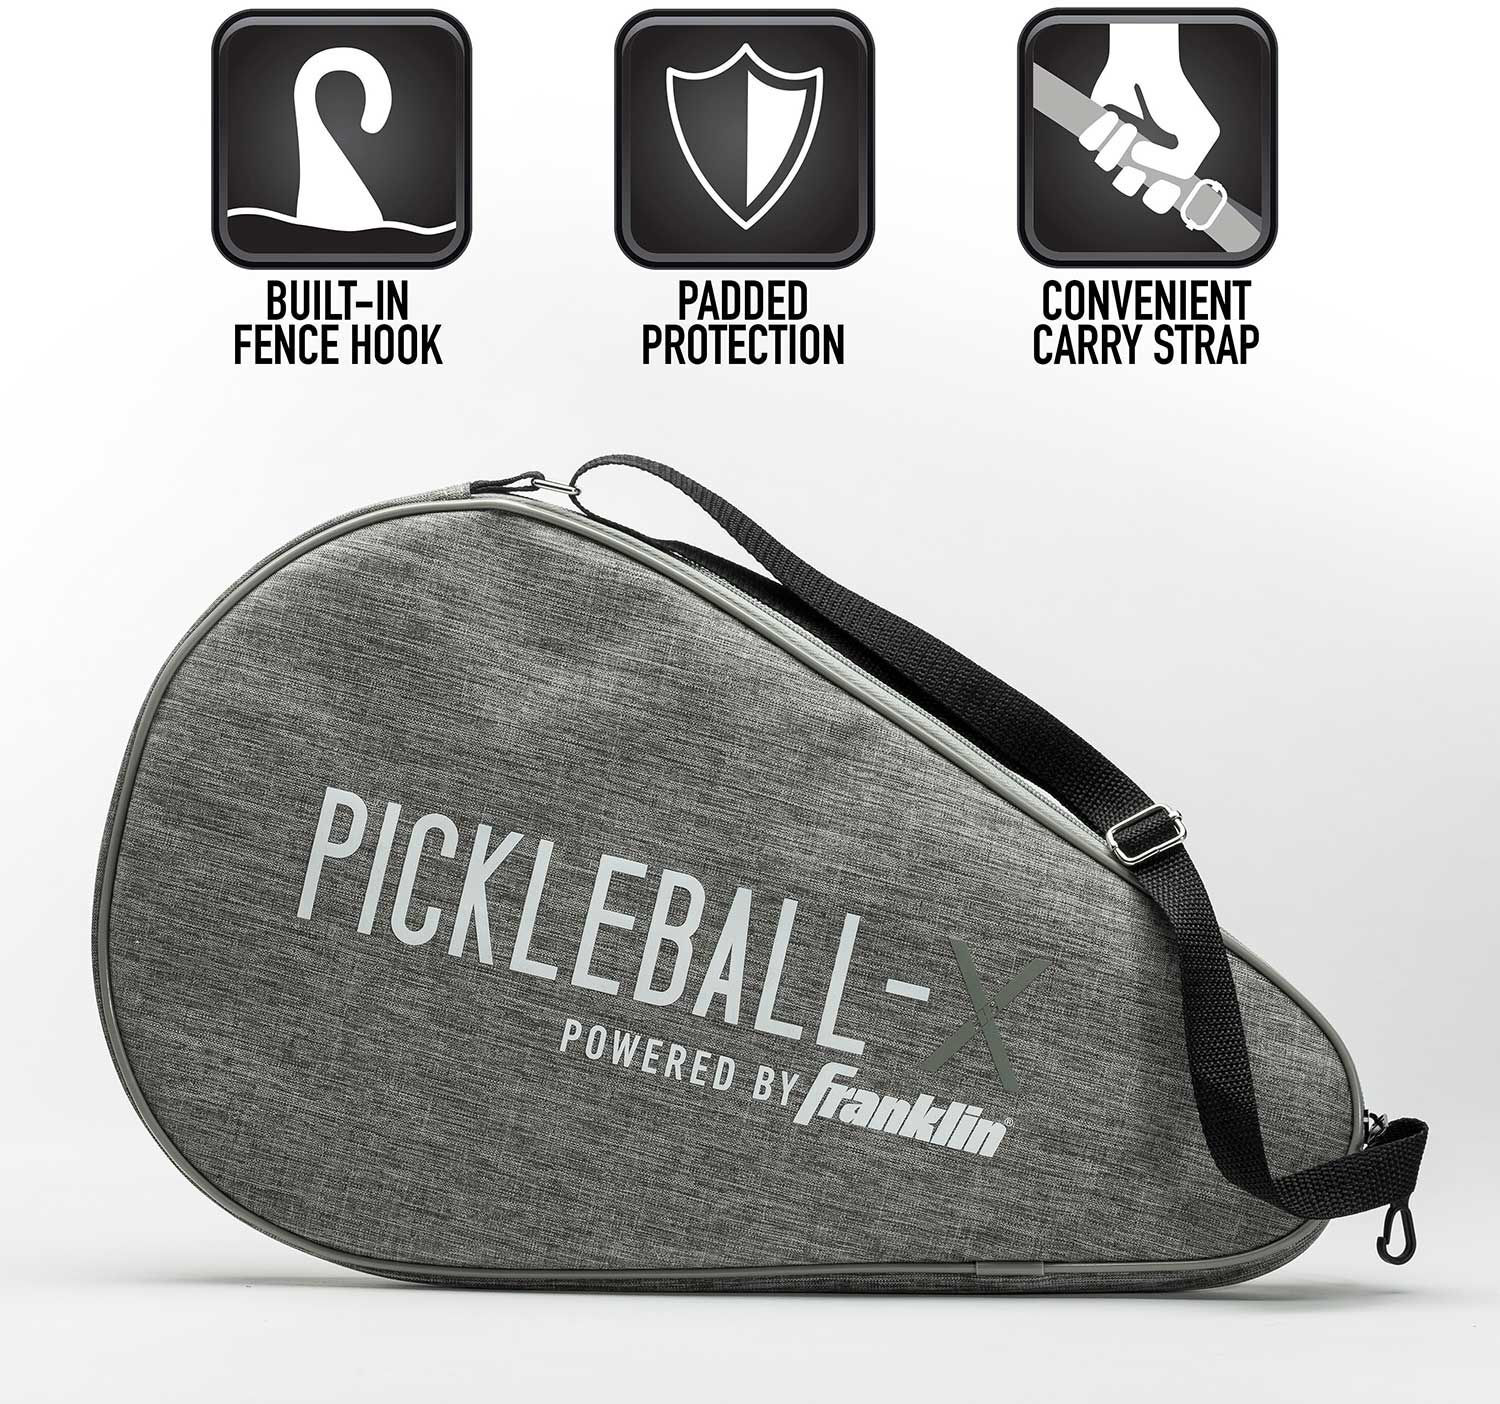 A convenient carry strap for a Franklin Pickleball Paddle Bag with white text.